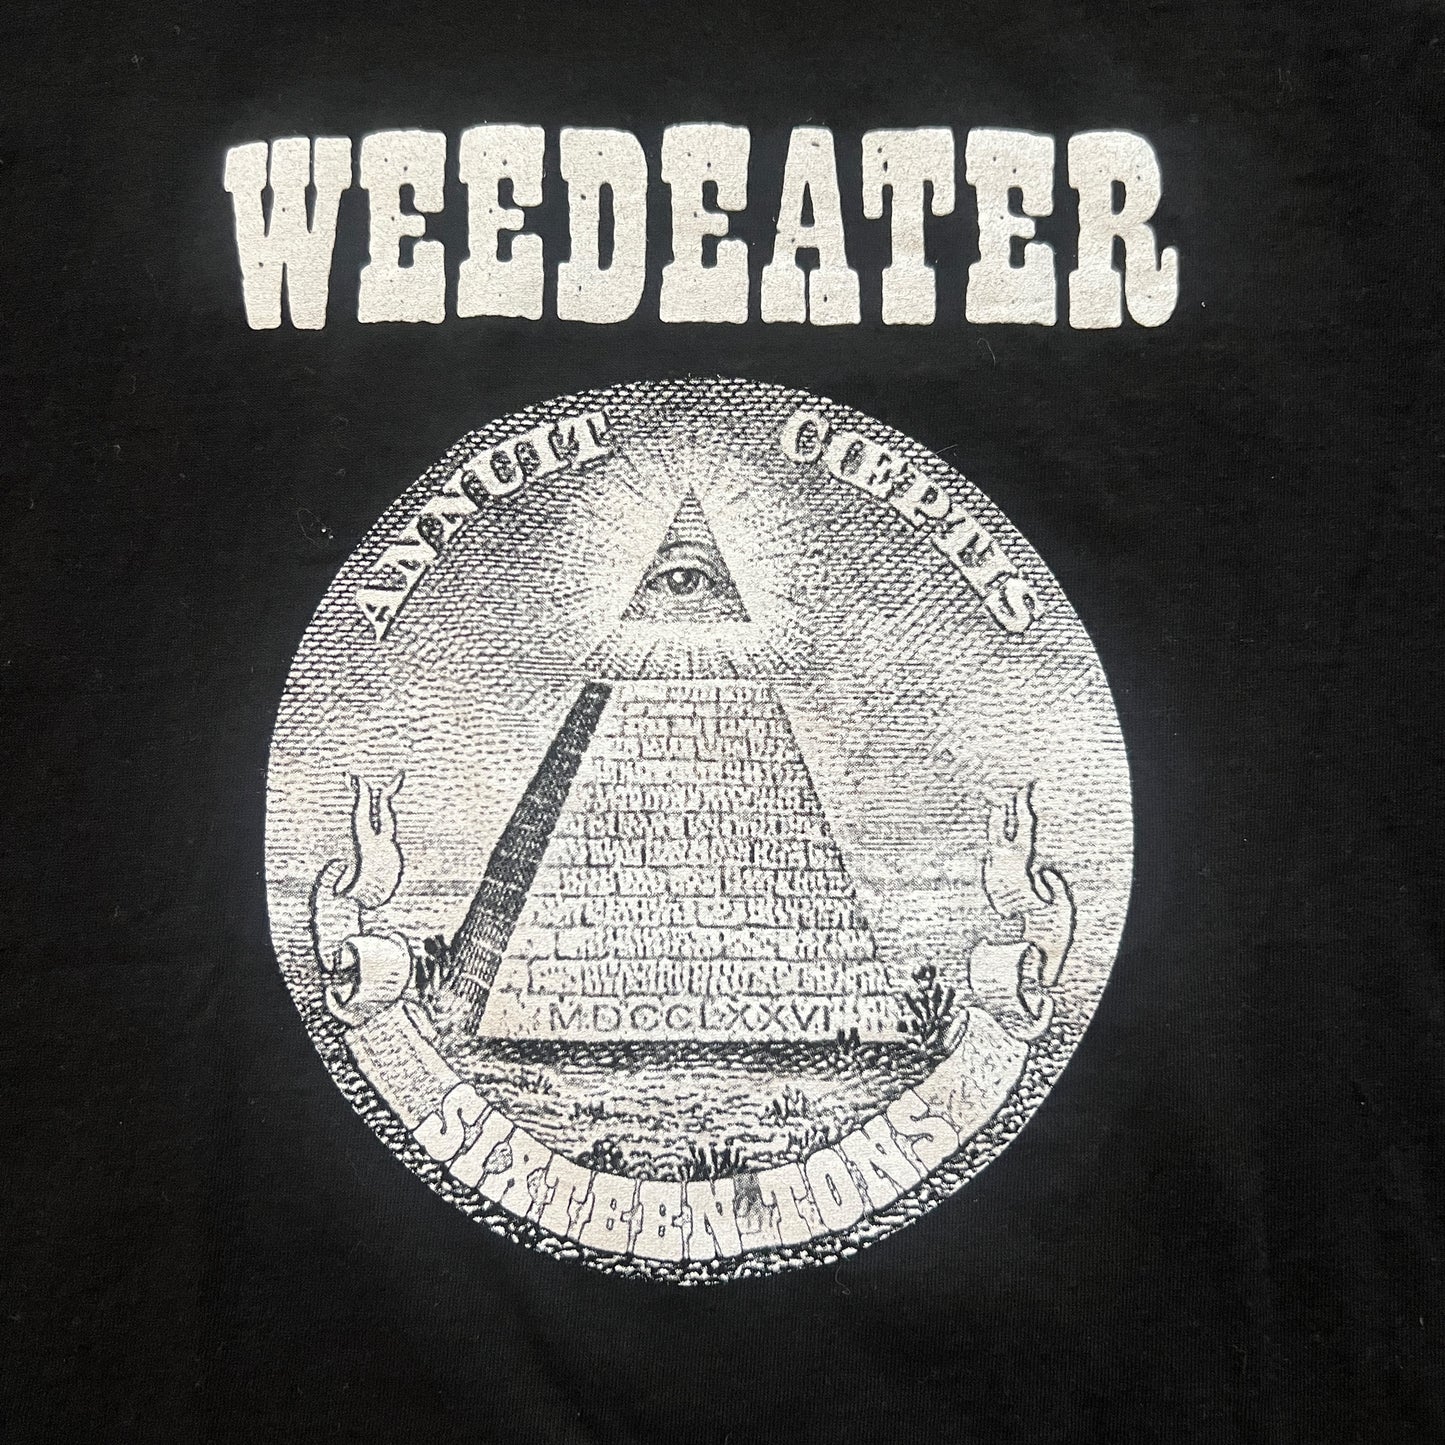 Weedeater Band Sixteen Tons Burn 1 Vintage T-Shirt Size M